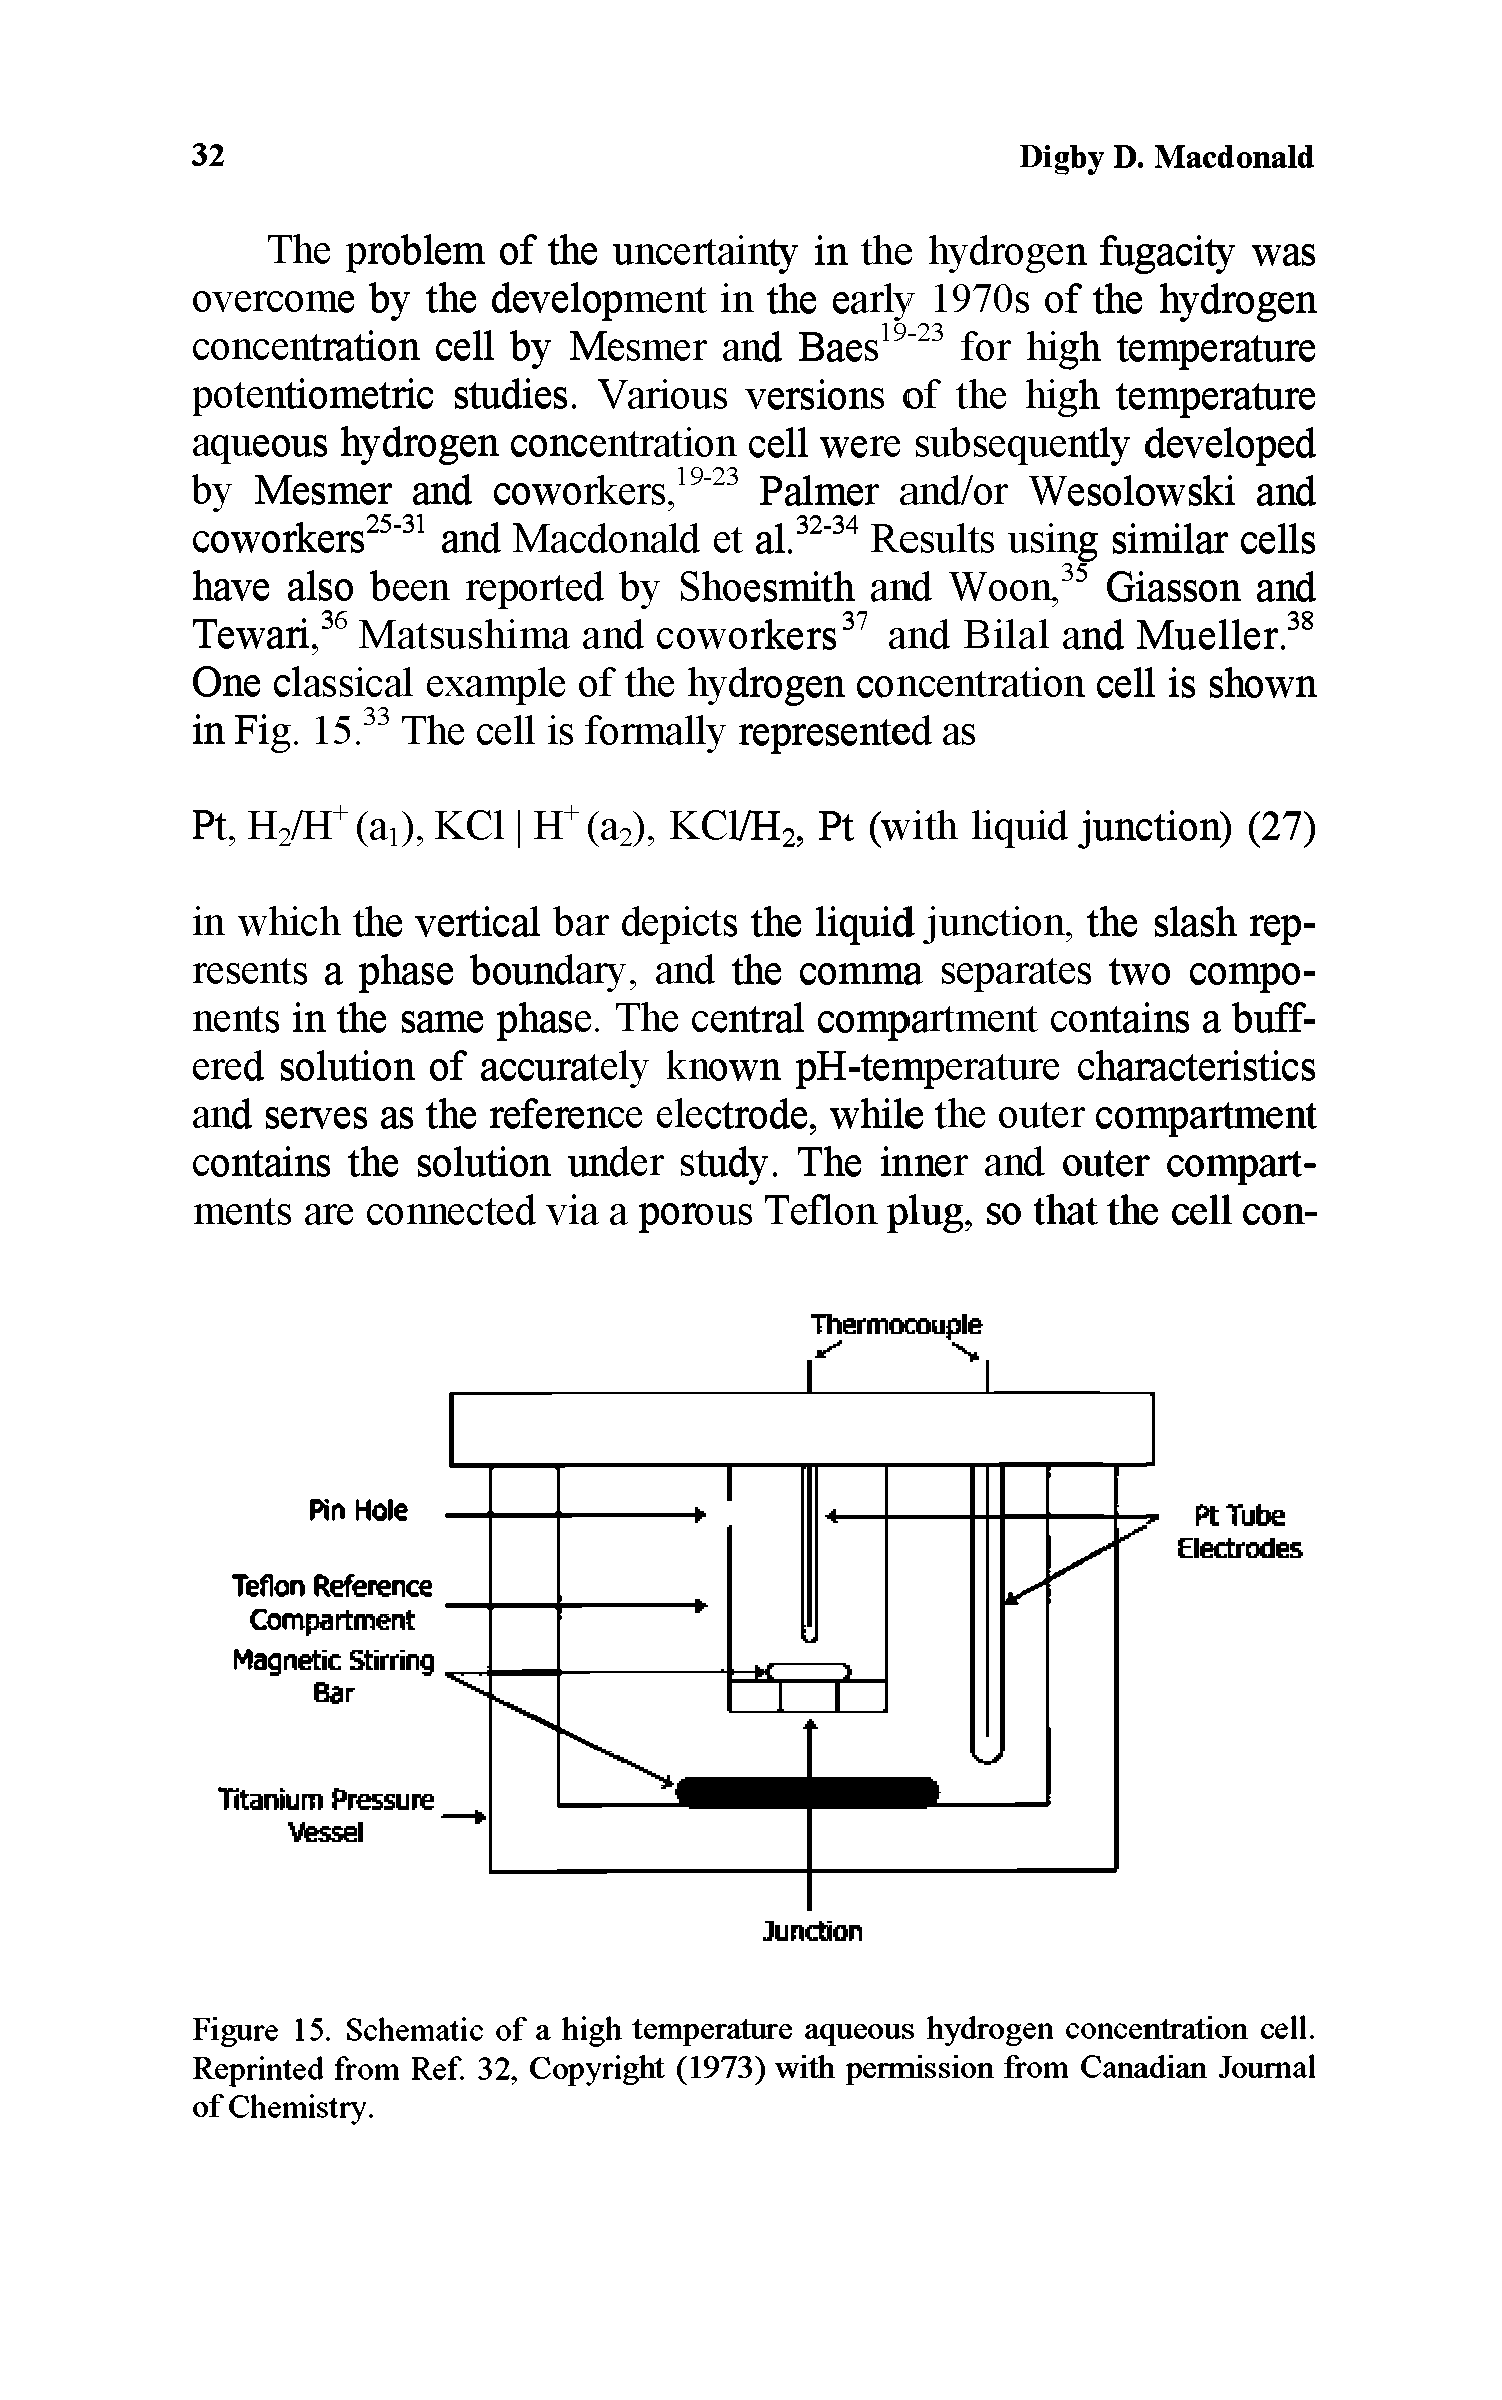 Figure 15. Schematic of a high temperature aqueous hydrogen concentration cell. Reprinted from Ref. 32, Copyright (1973) with permission from Canadian Journal of Chemistry.